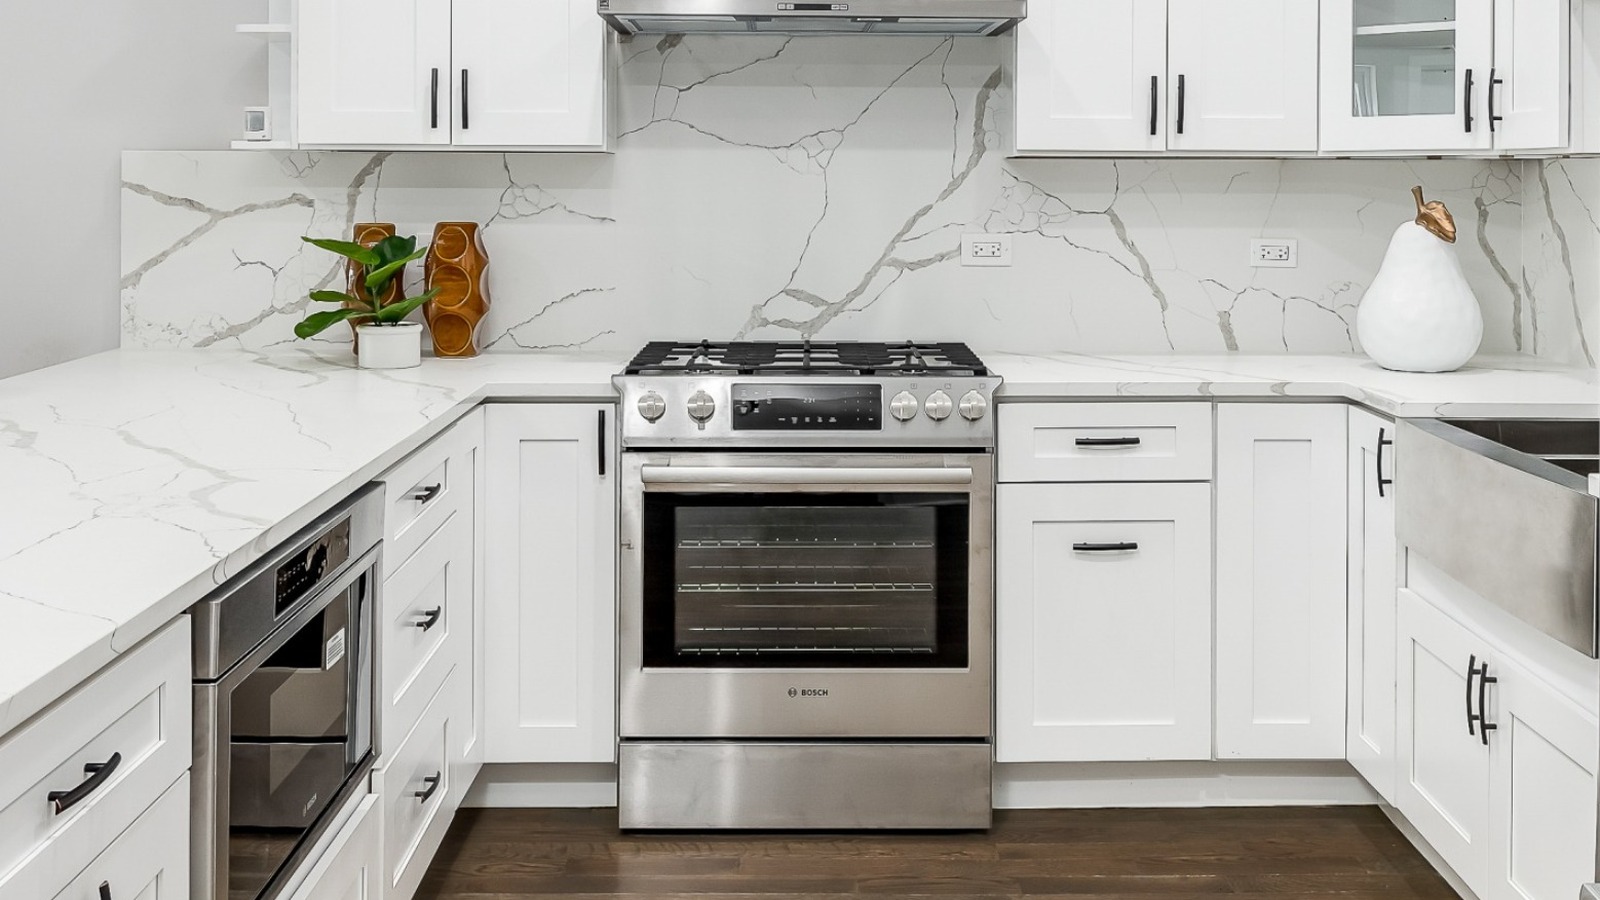 https://www.housedigest.com/img/gallery/you-probably-didnt-know-the-oven-drawer-in-your-home-can-do-this/l-intro-1649768635.jpg